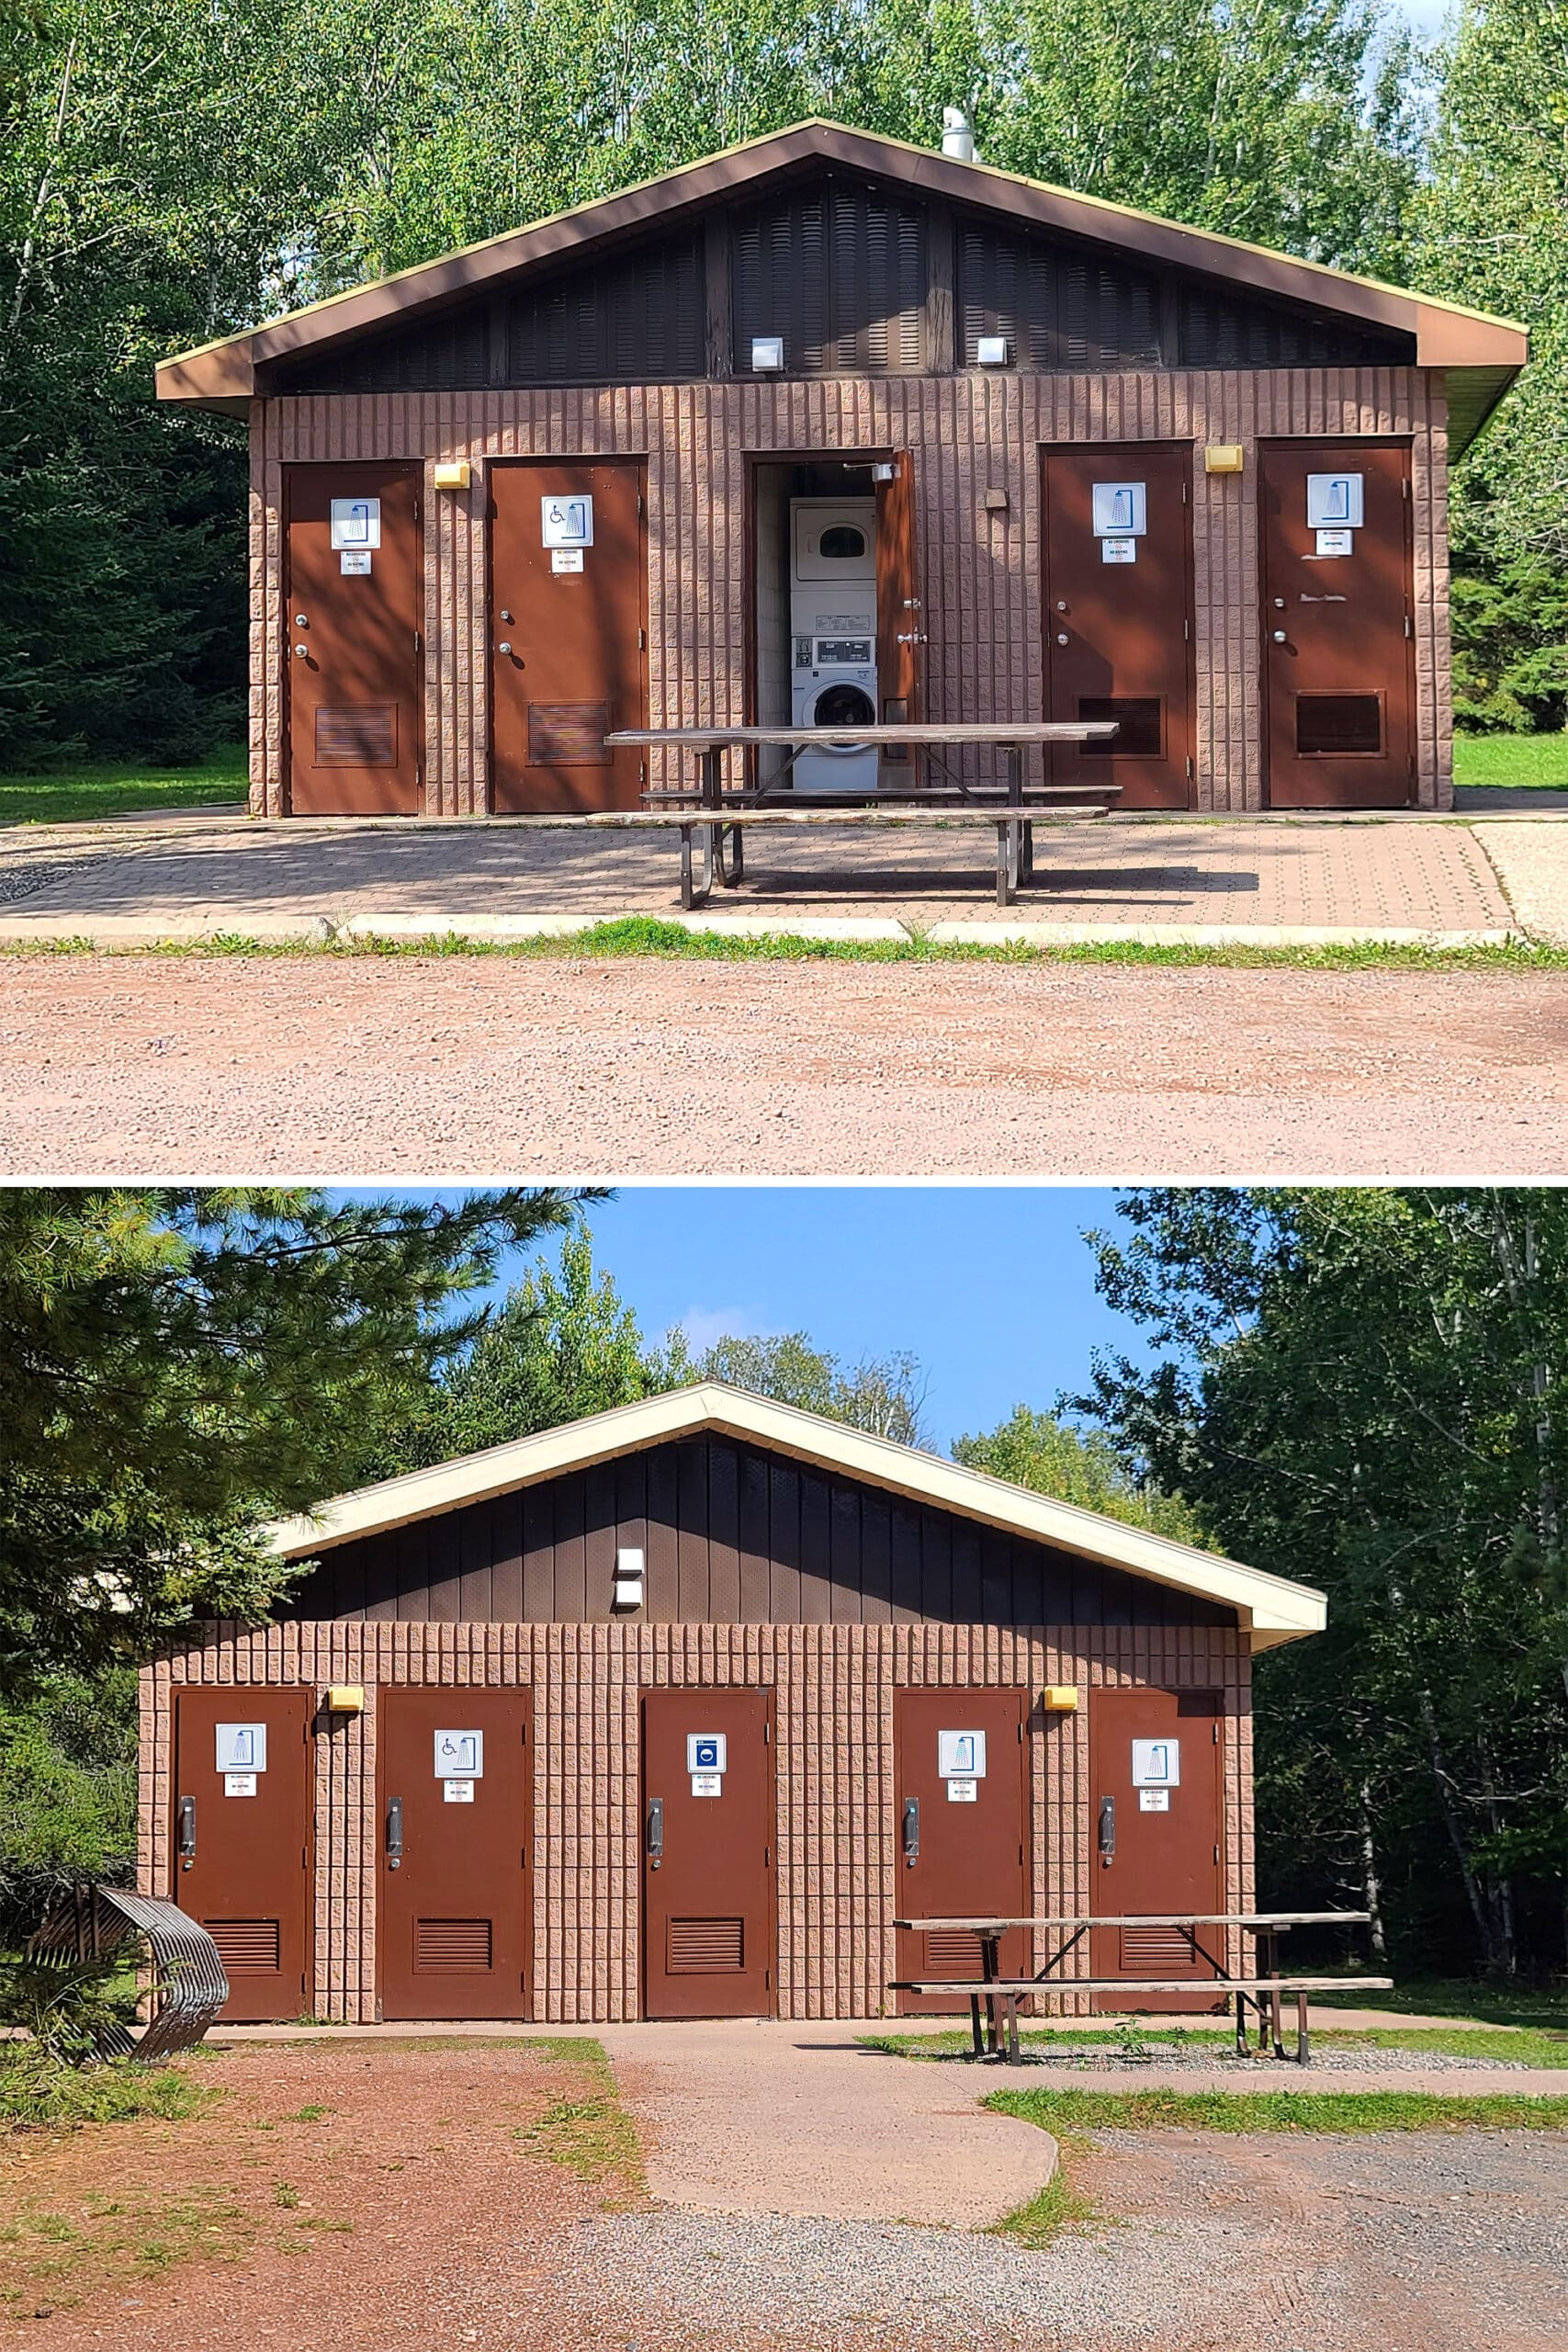 2 part image showing the 2 comfort stations in Marie Louise Lake campground.